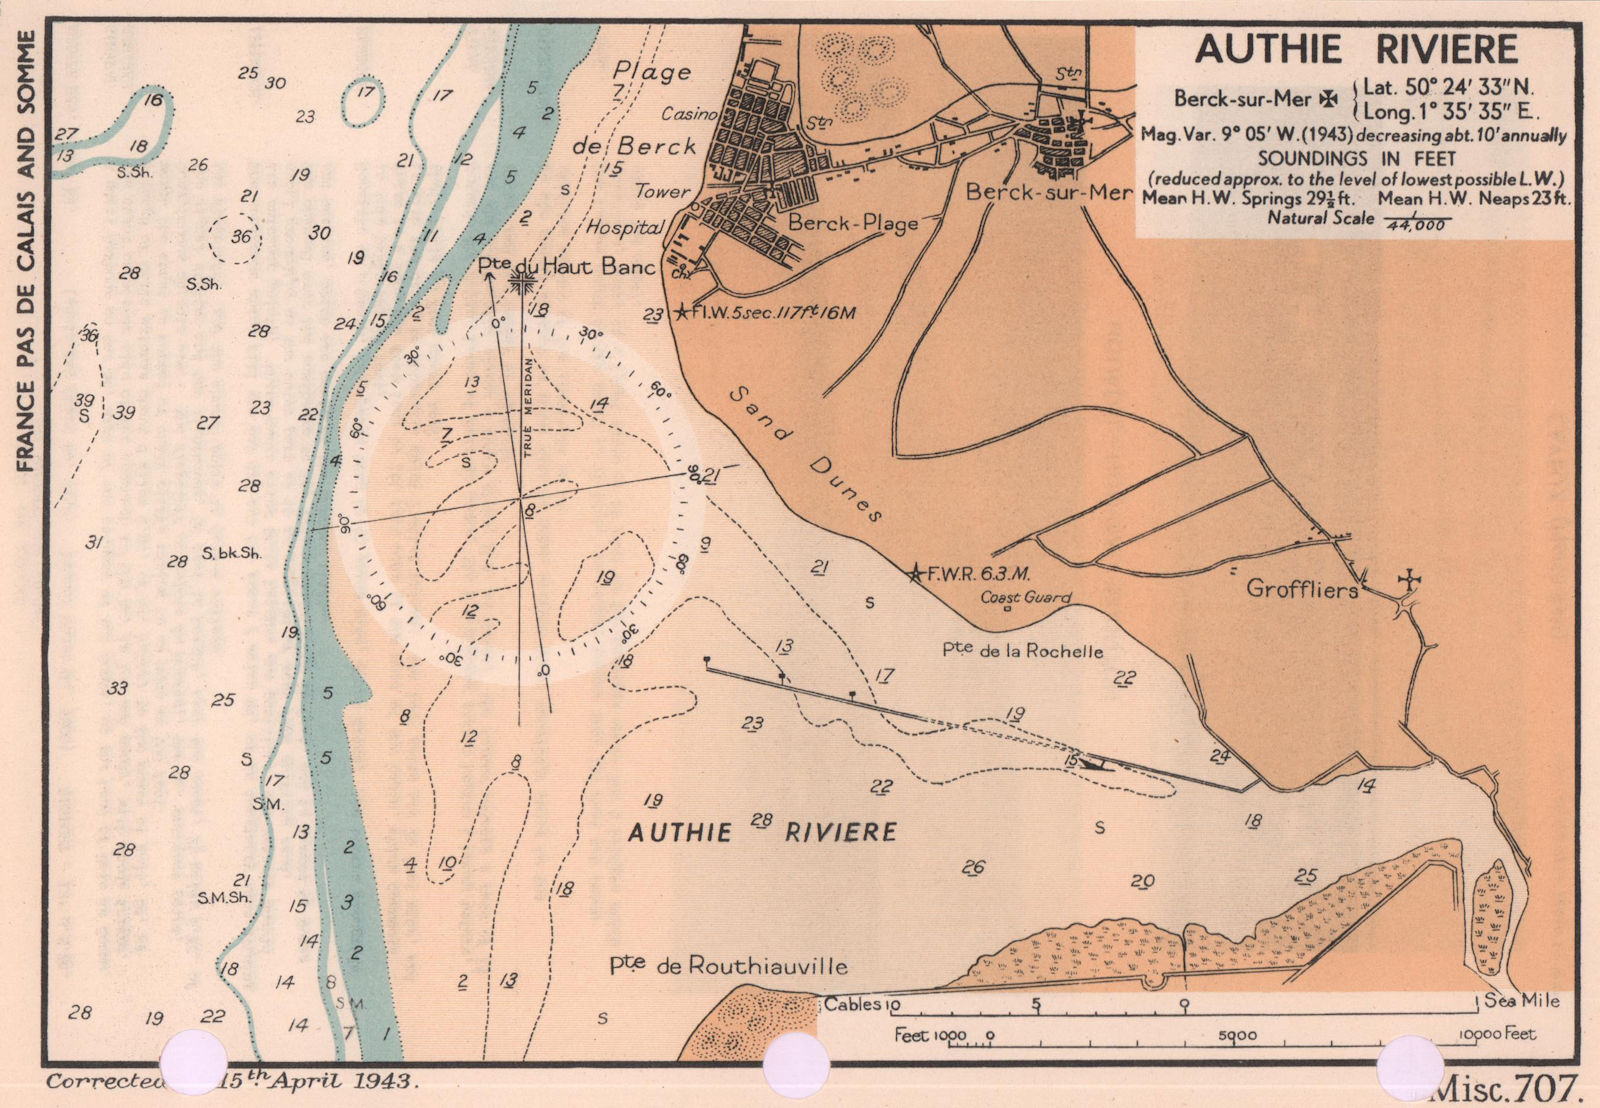 Associate Product Authie Riviere coast chart. Berck town plan. D-Day planning map. ADMIRALTY 1943